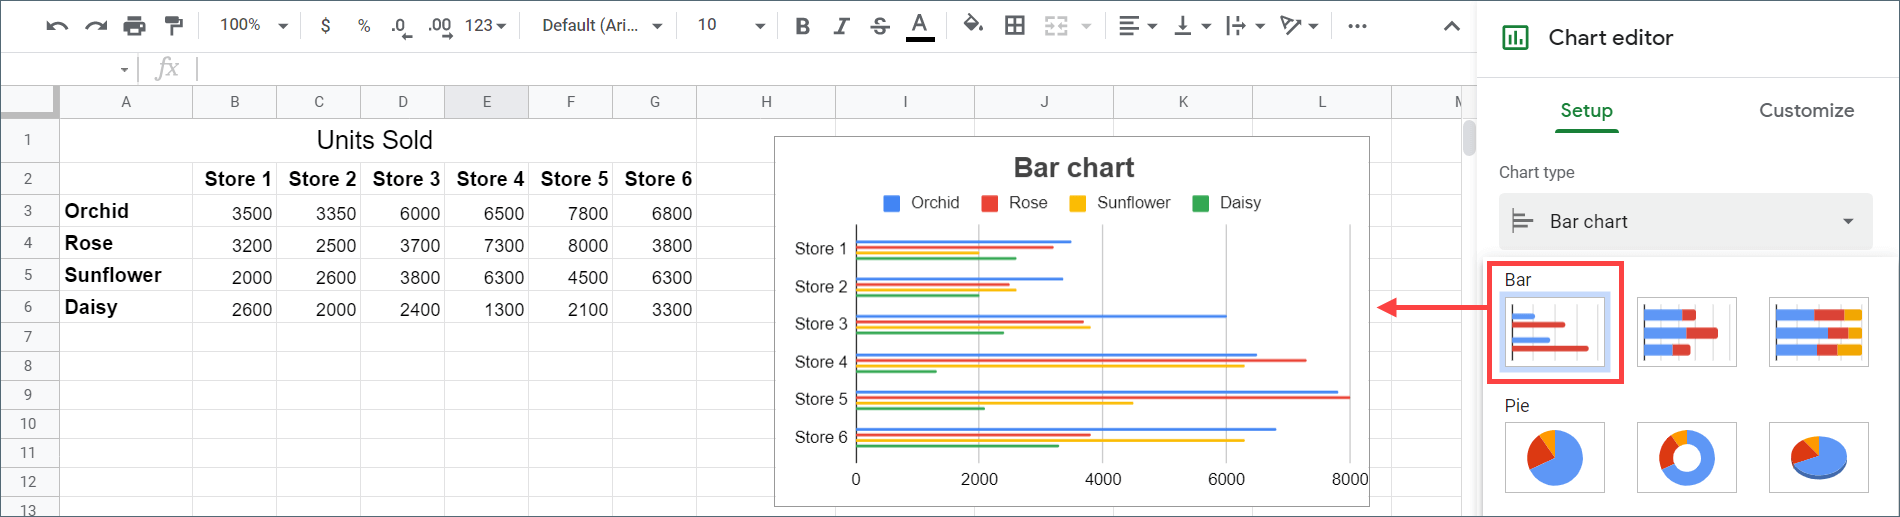 How to make a bar chart in Google Sheets